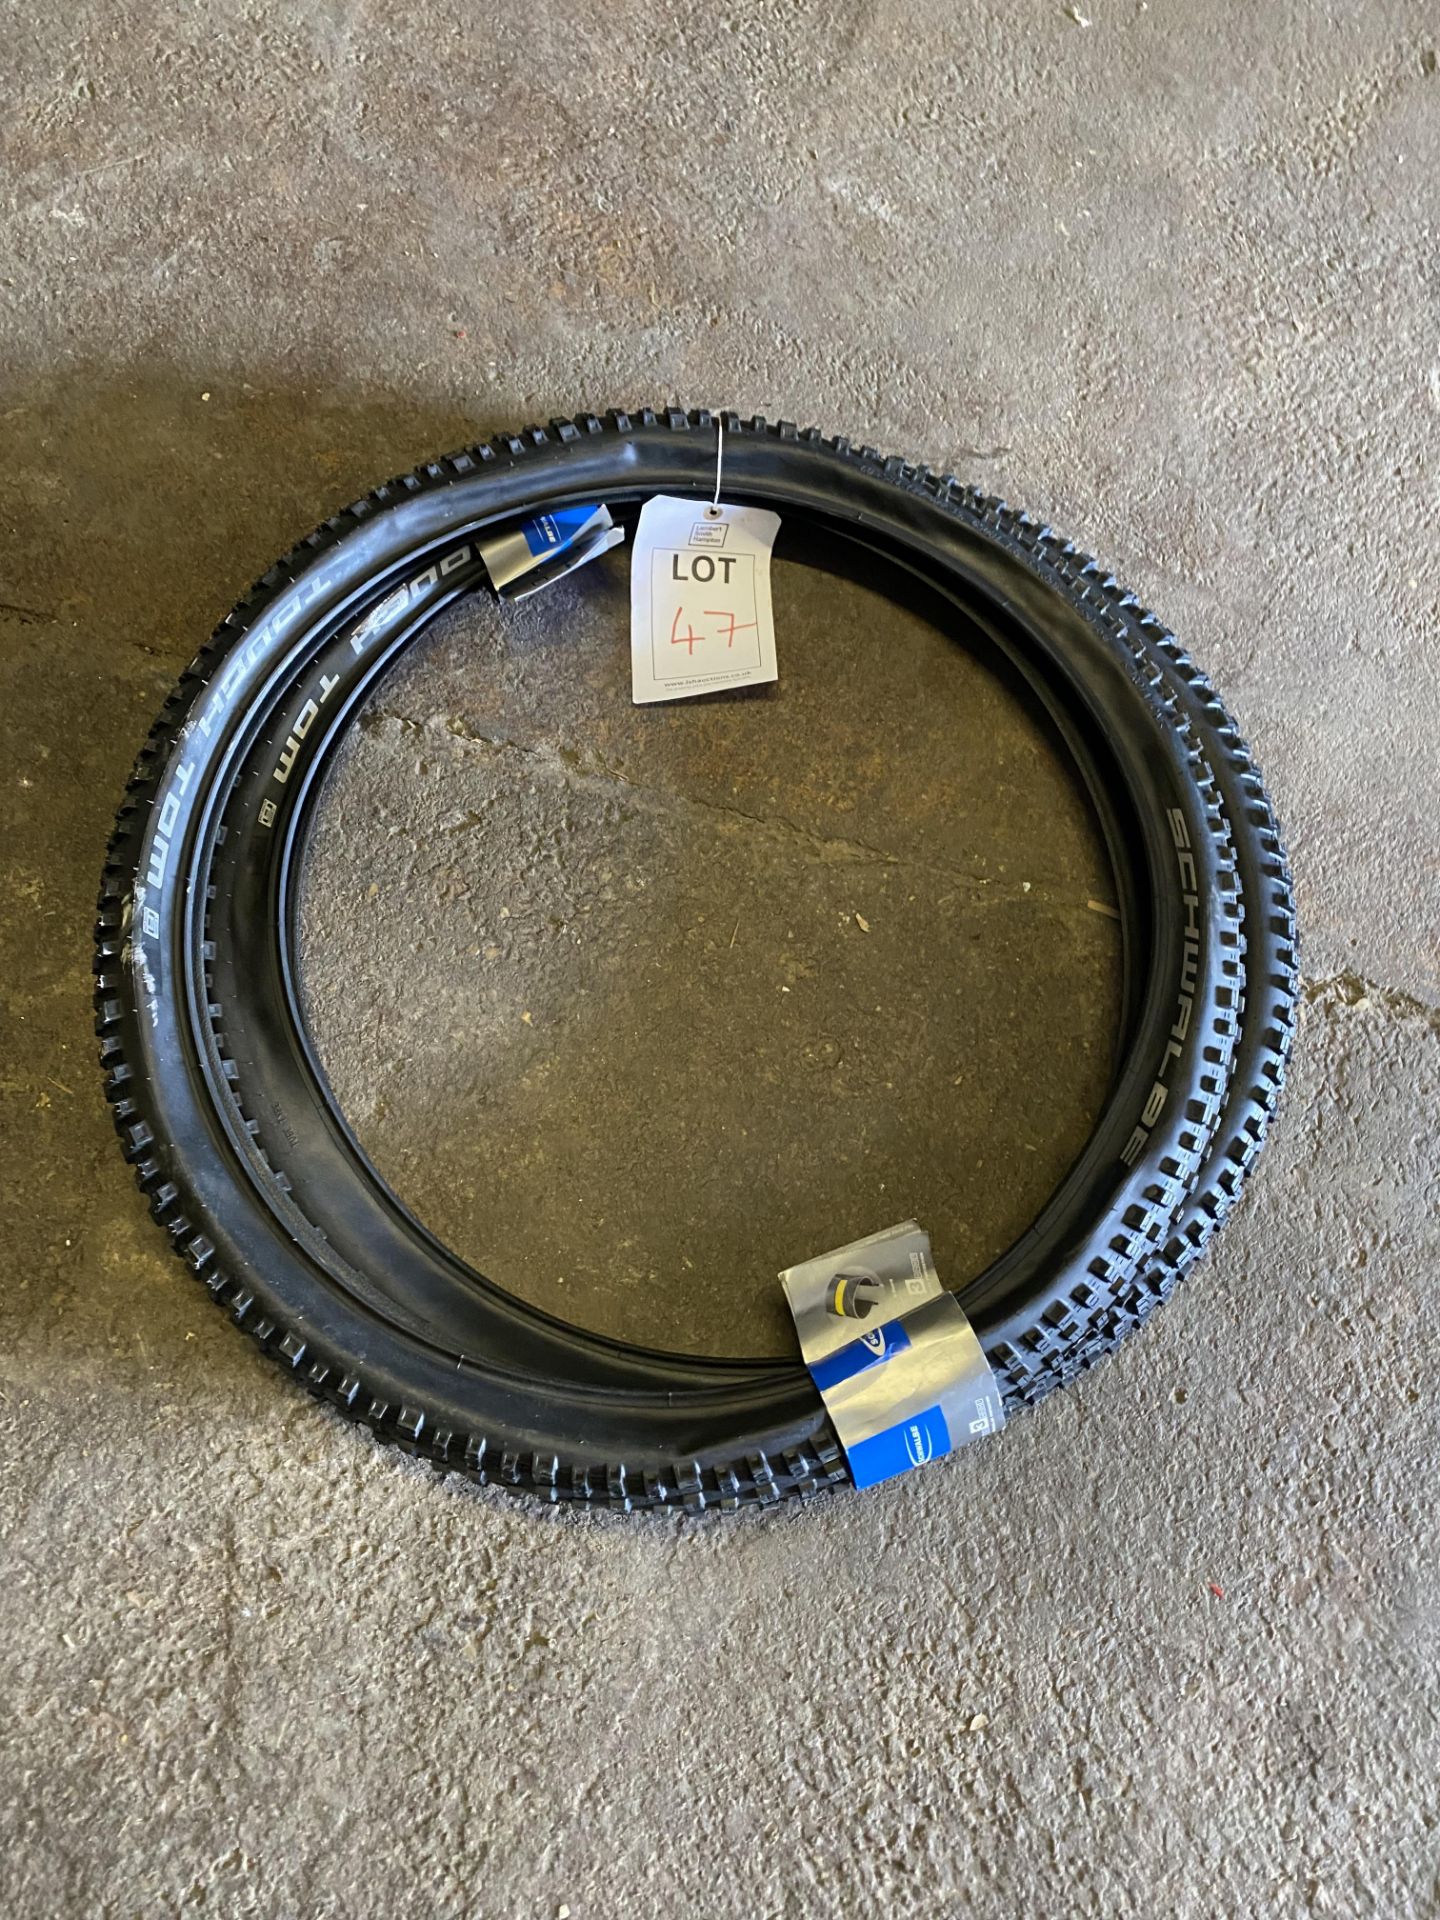 Pair of Schwalbe Tough Tom tyres, 27.5 x 2.35